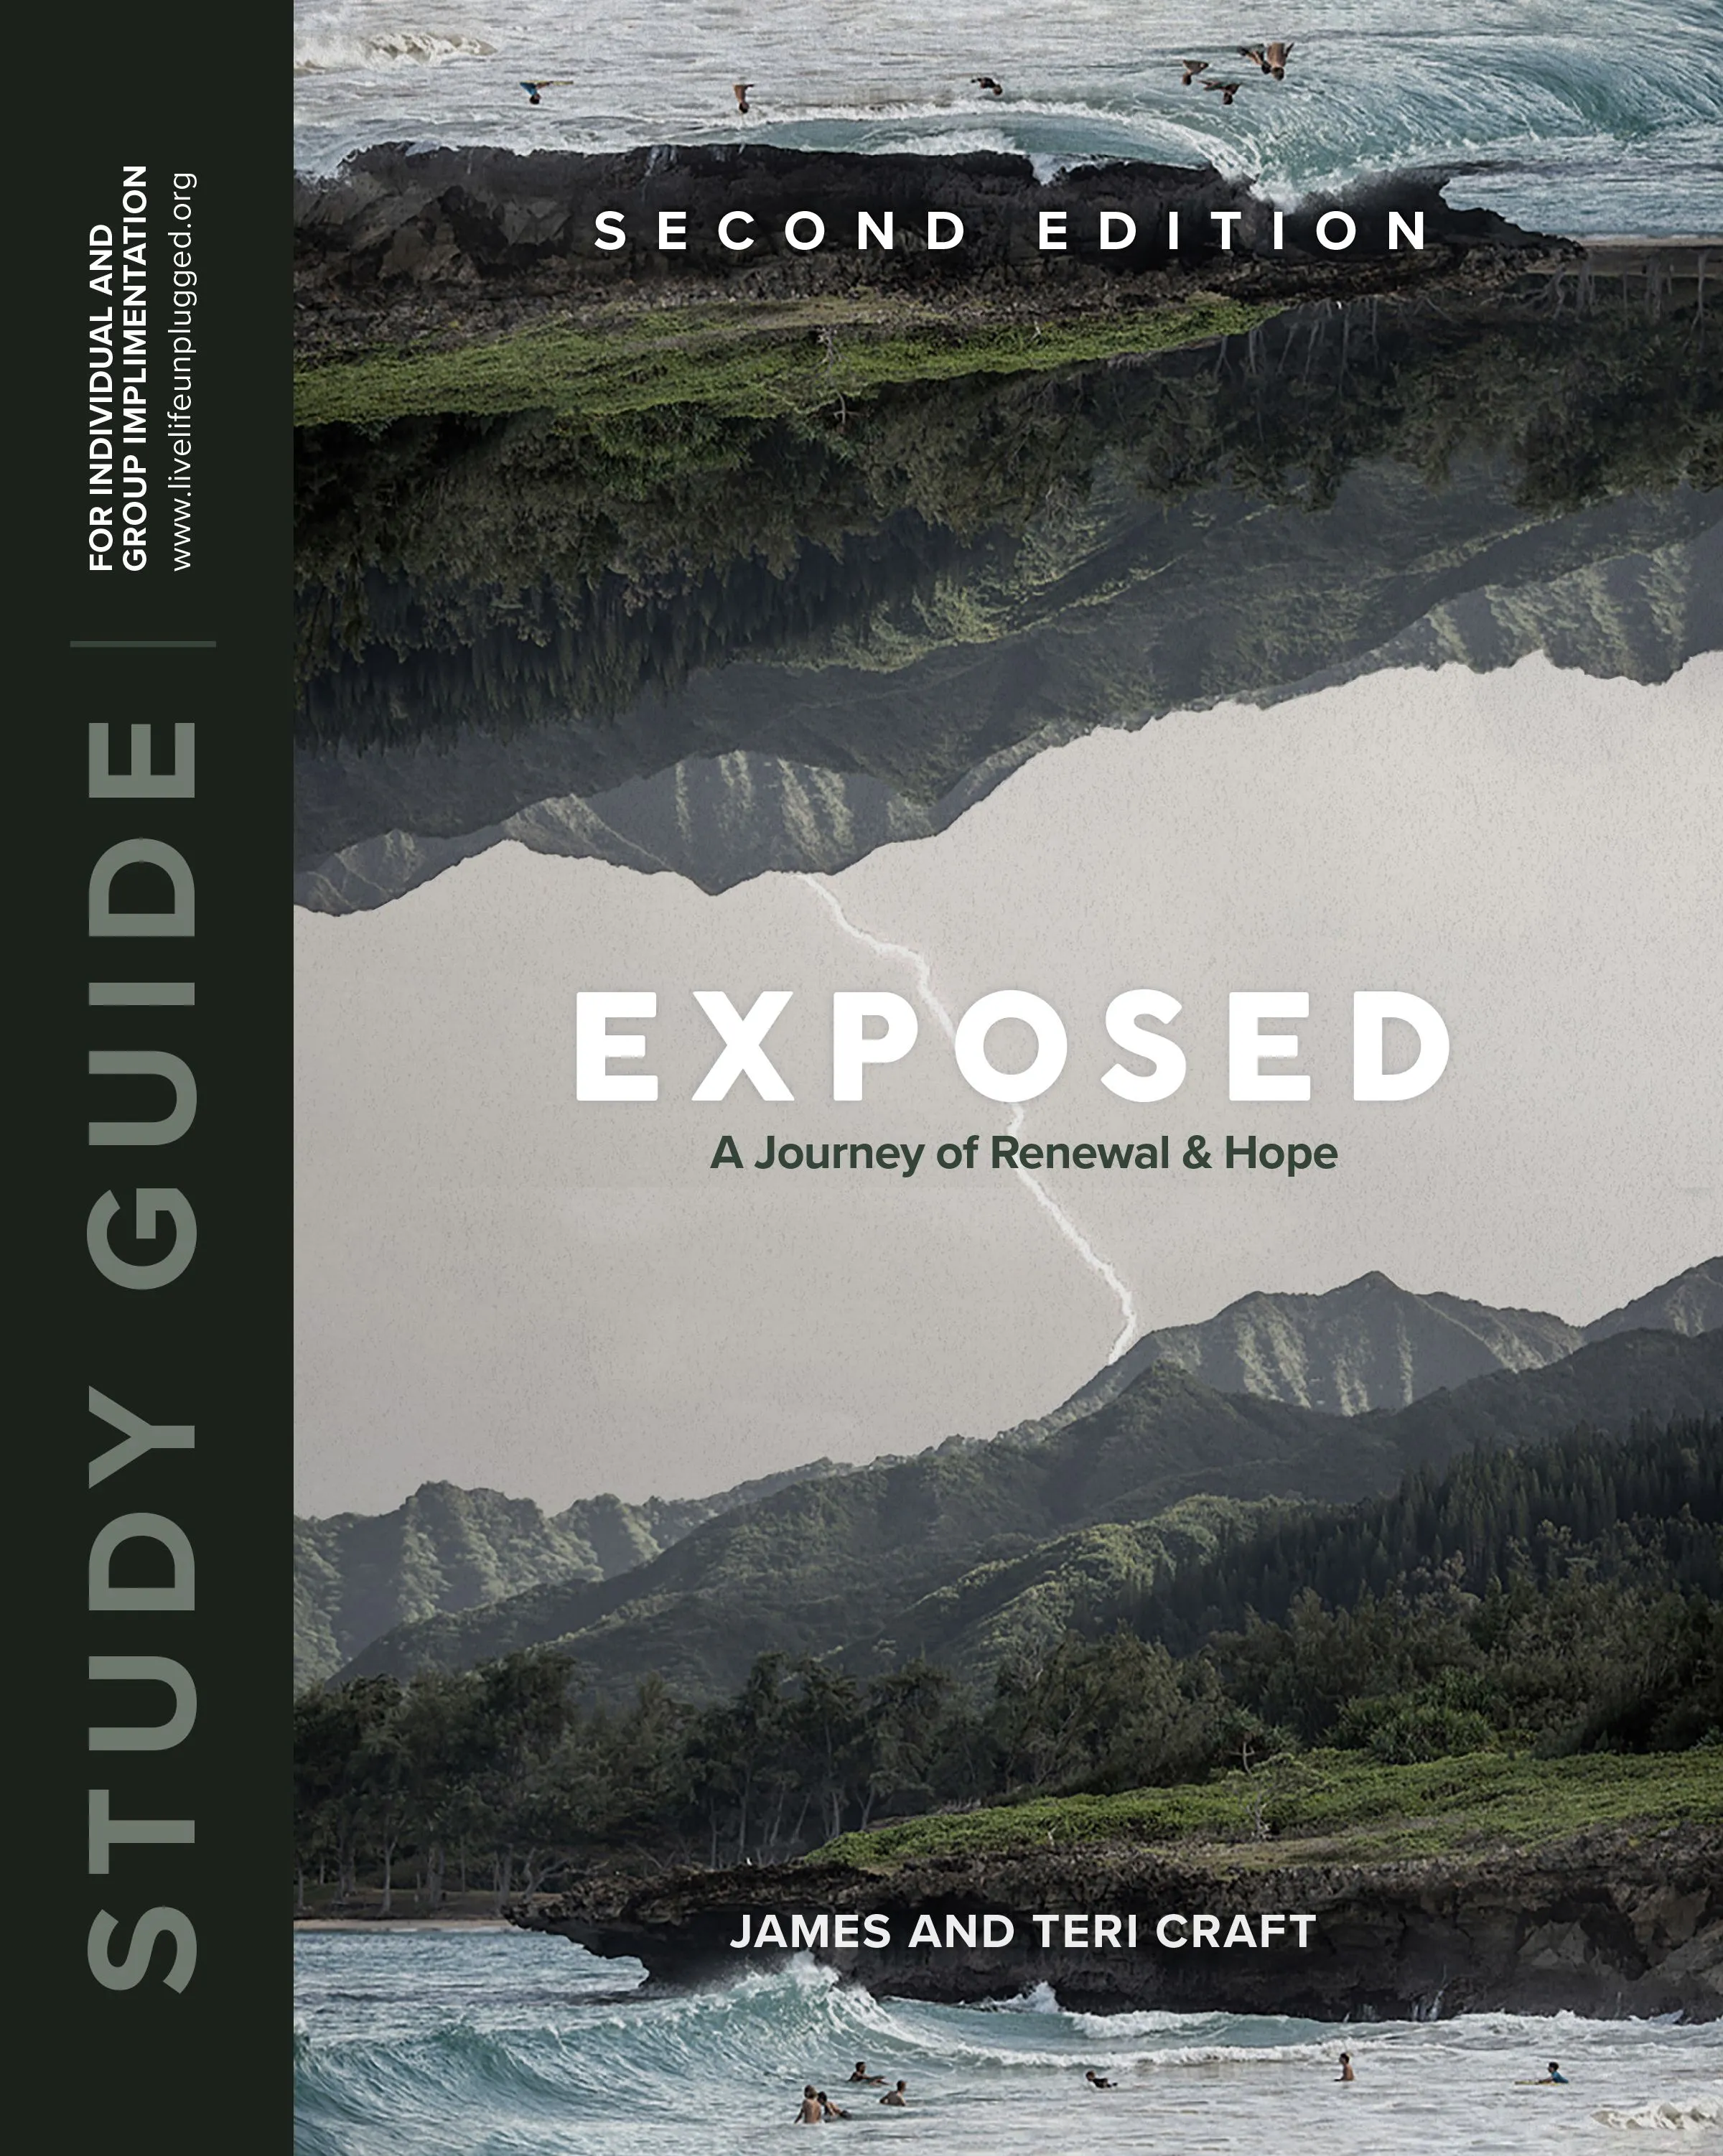 EXPOSED Study Guide: A Journey Of Renewal and Hope by James and Teri Craft – Second Edition